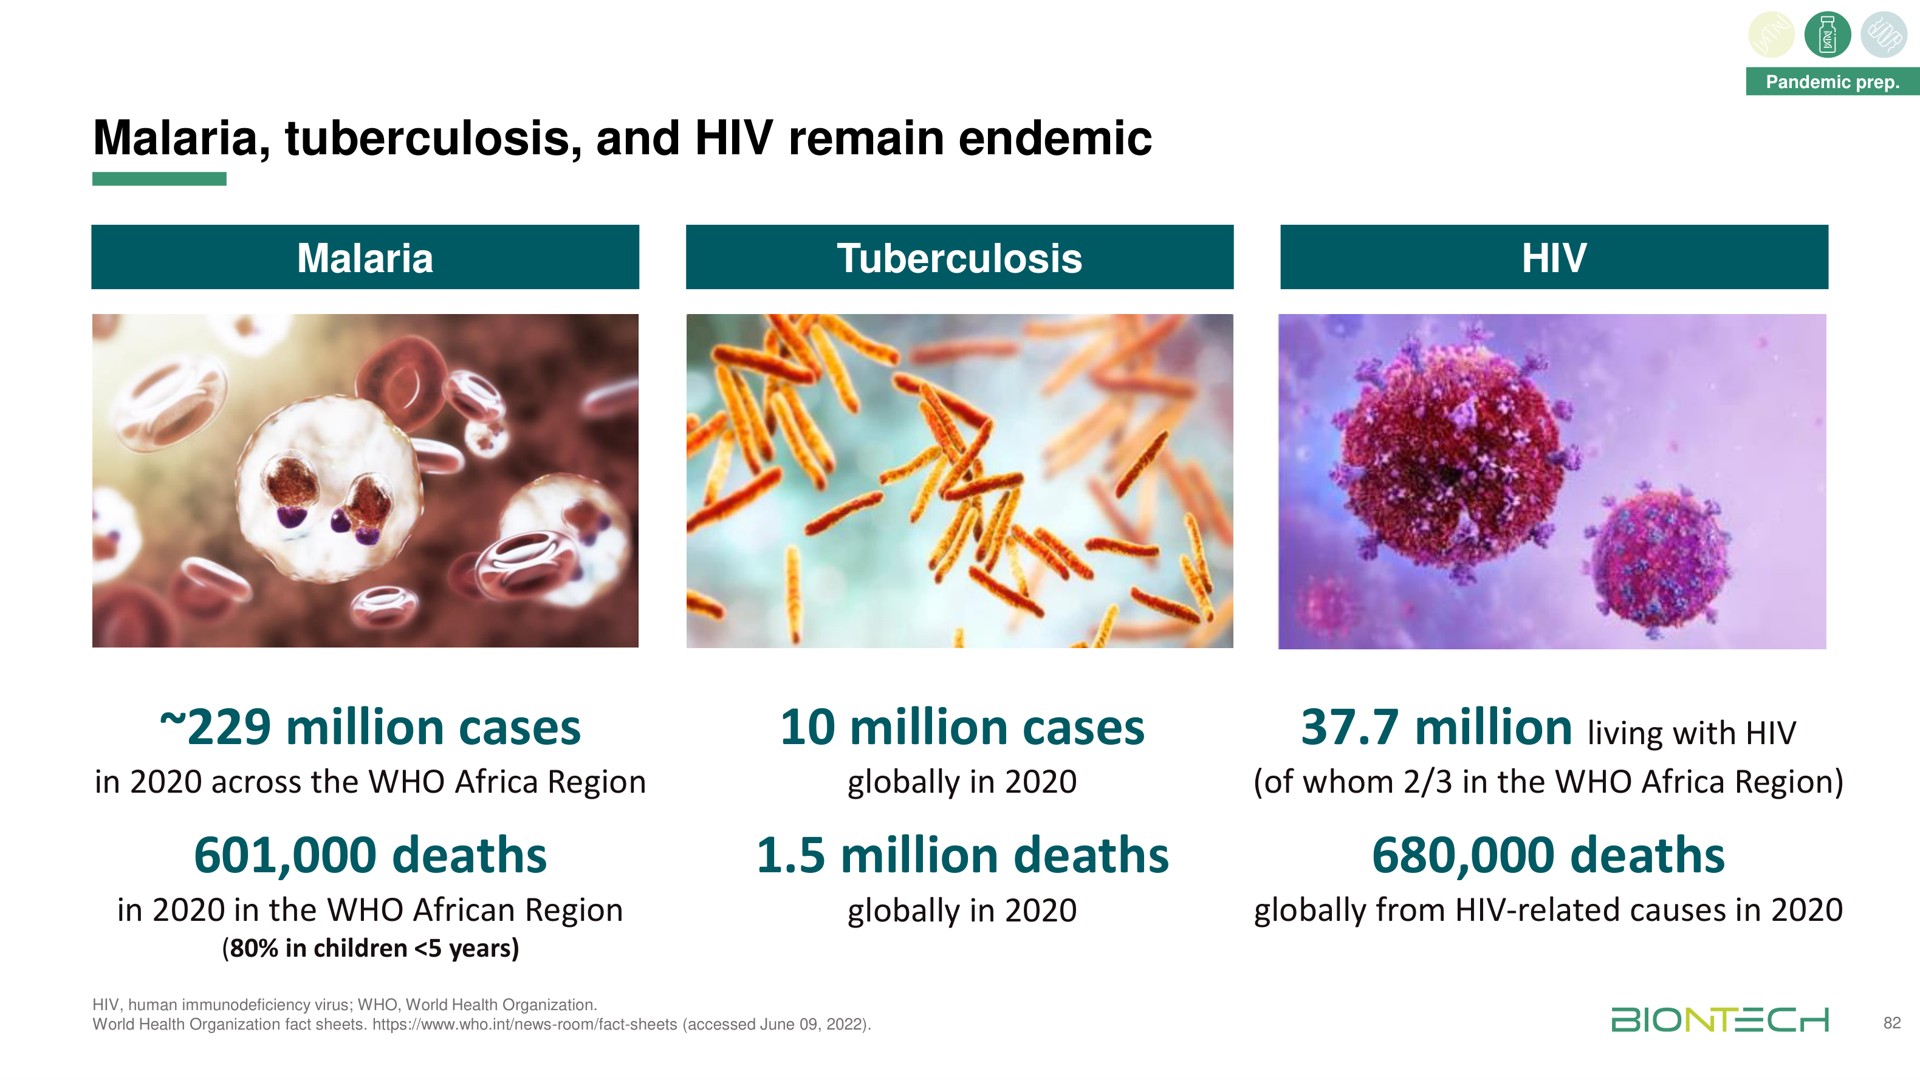 malaria tuberculosis and remain endemic million cases million cases deaths million deaths deaths with | BioNTech